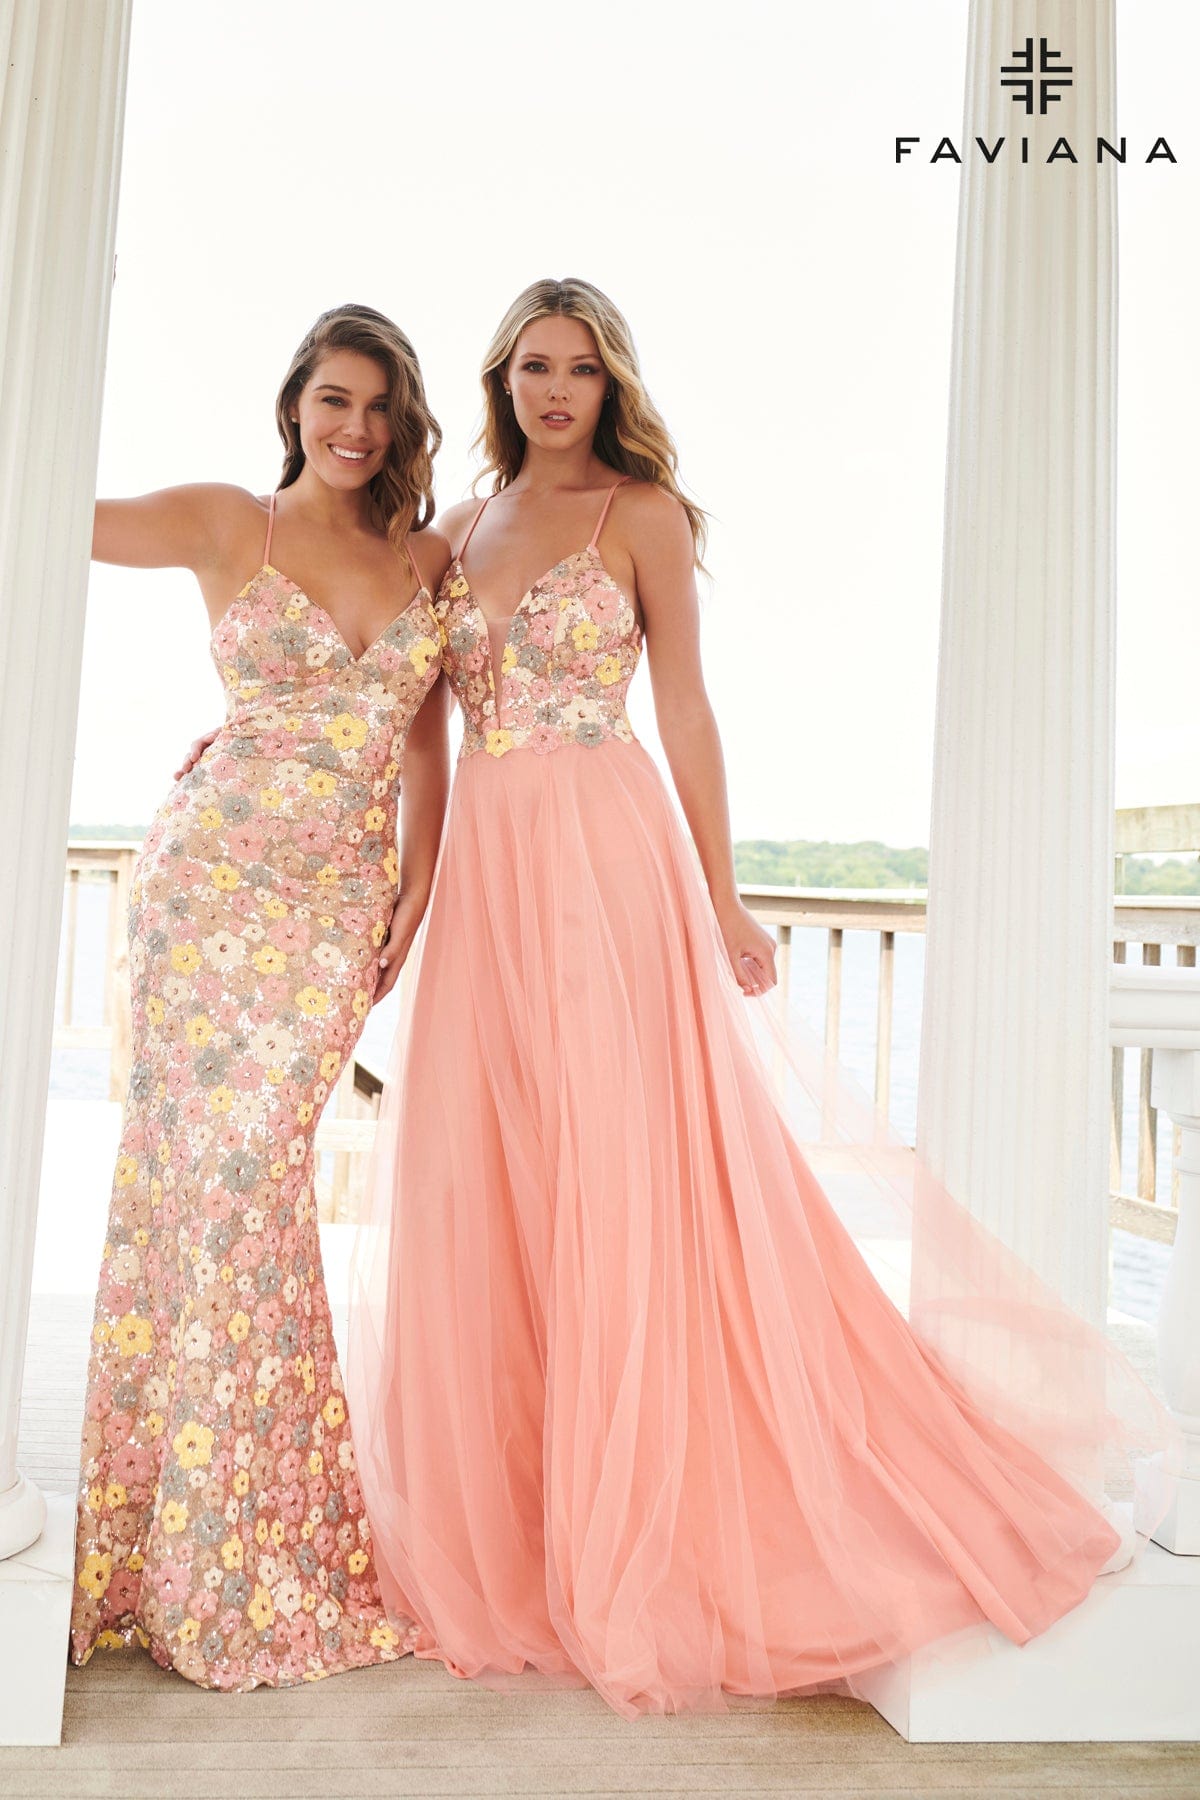 Spring Sequin Prom Dress With Floral Aesthetic Design | 11000